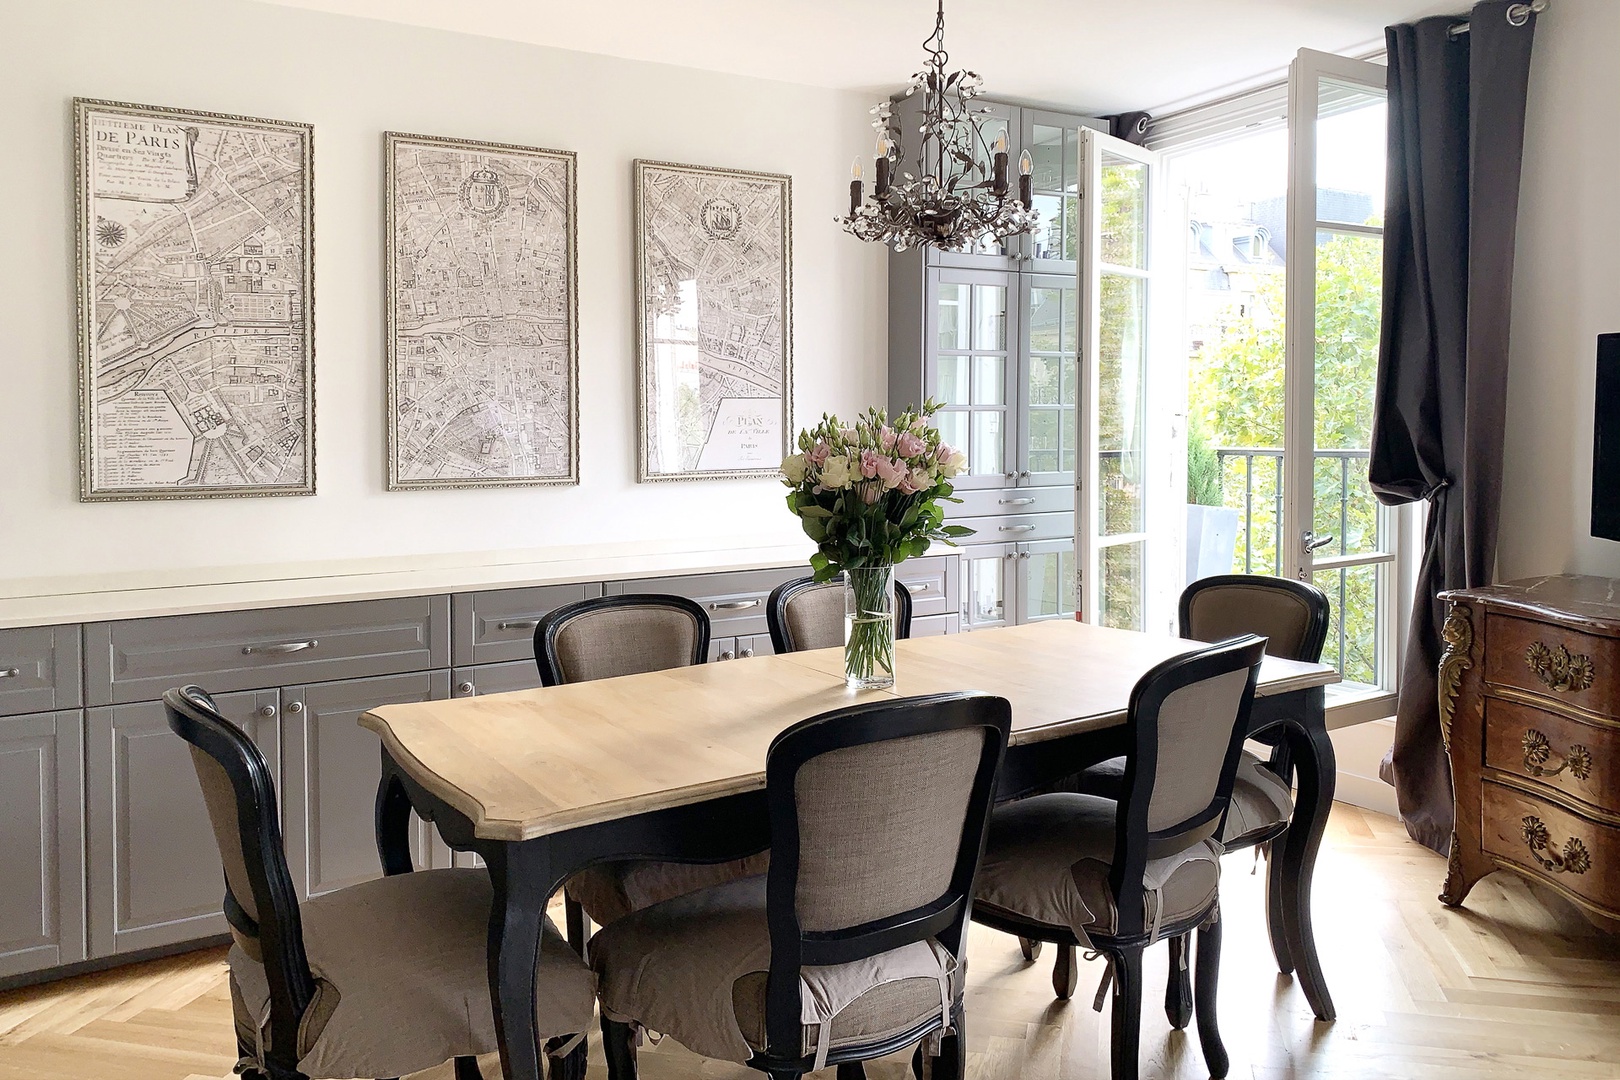 The dining table comfortably seats six people - perfect for dinner parties!